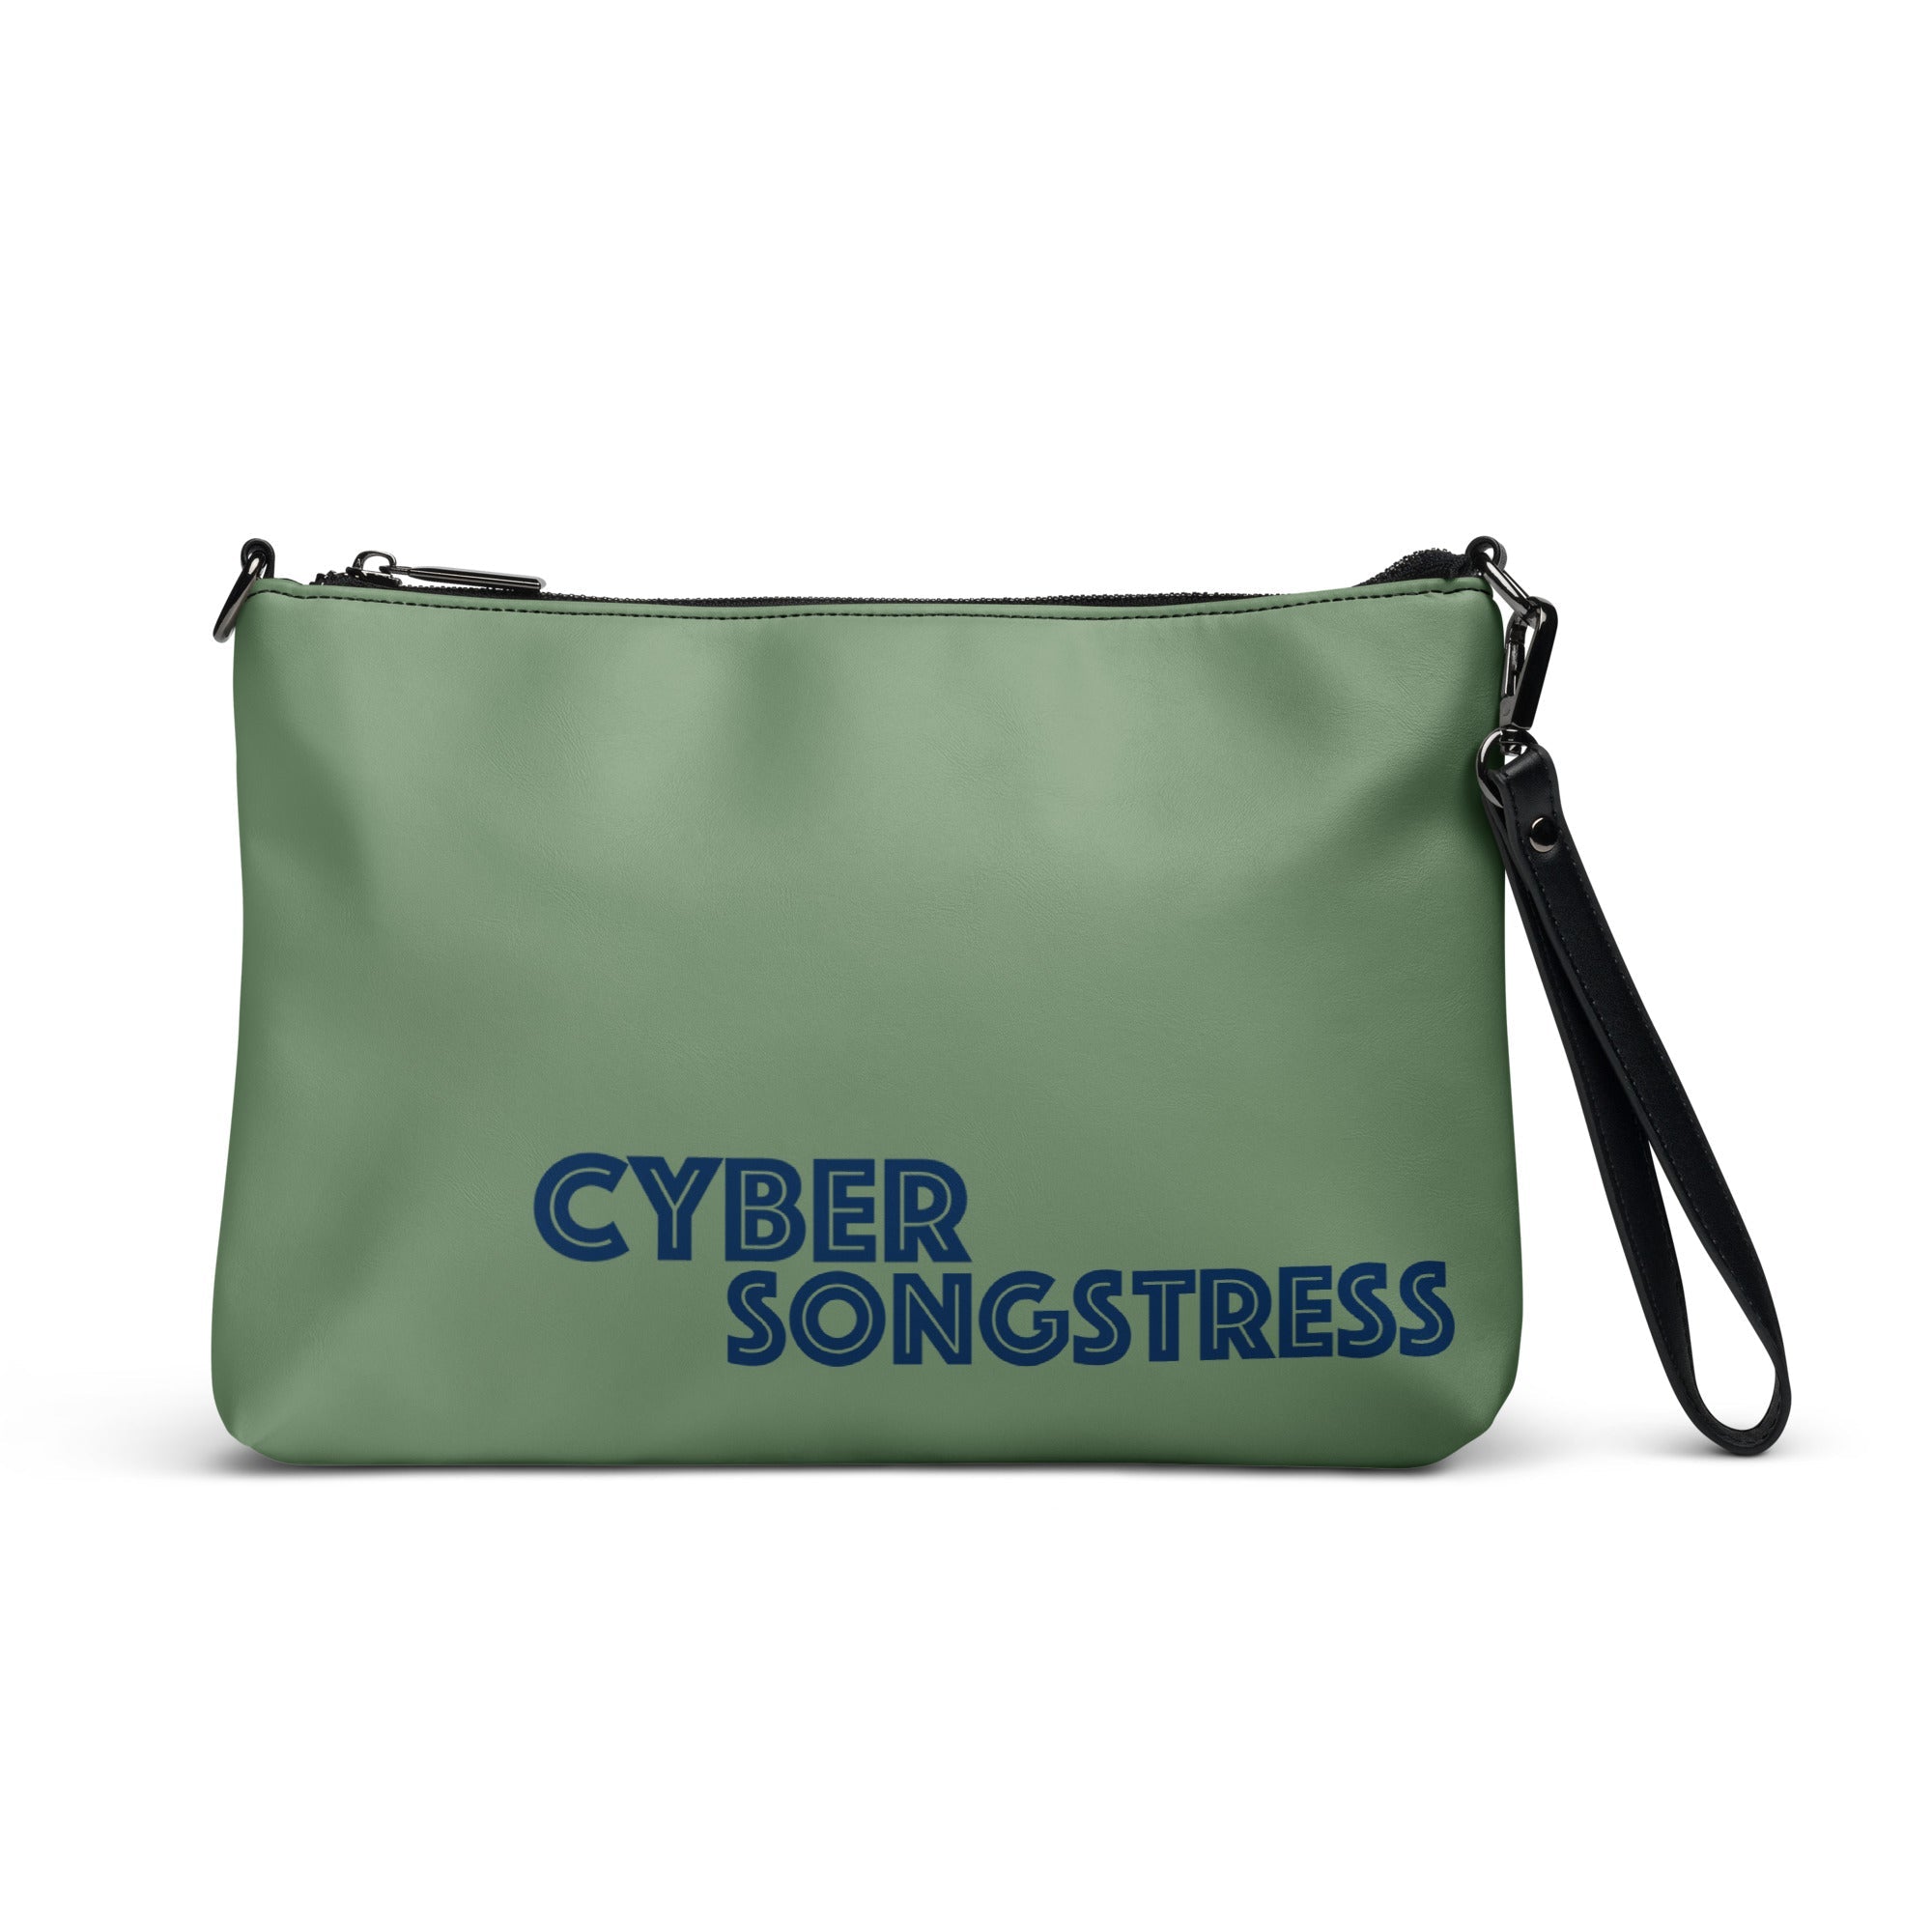 Cyber Songstress Iconic Badge Crossbody/Clutch The Groovalution